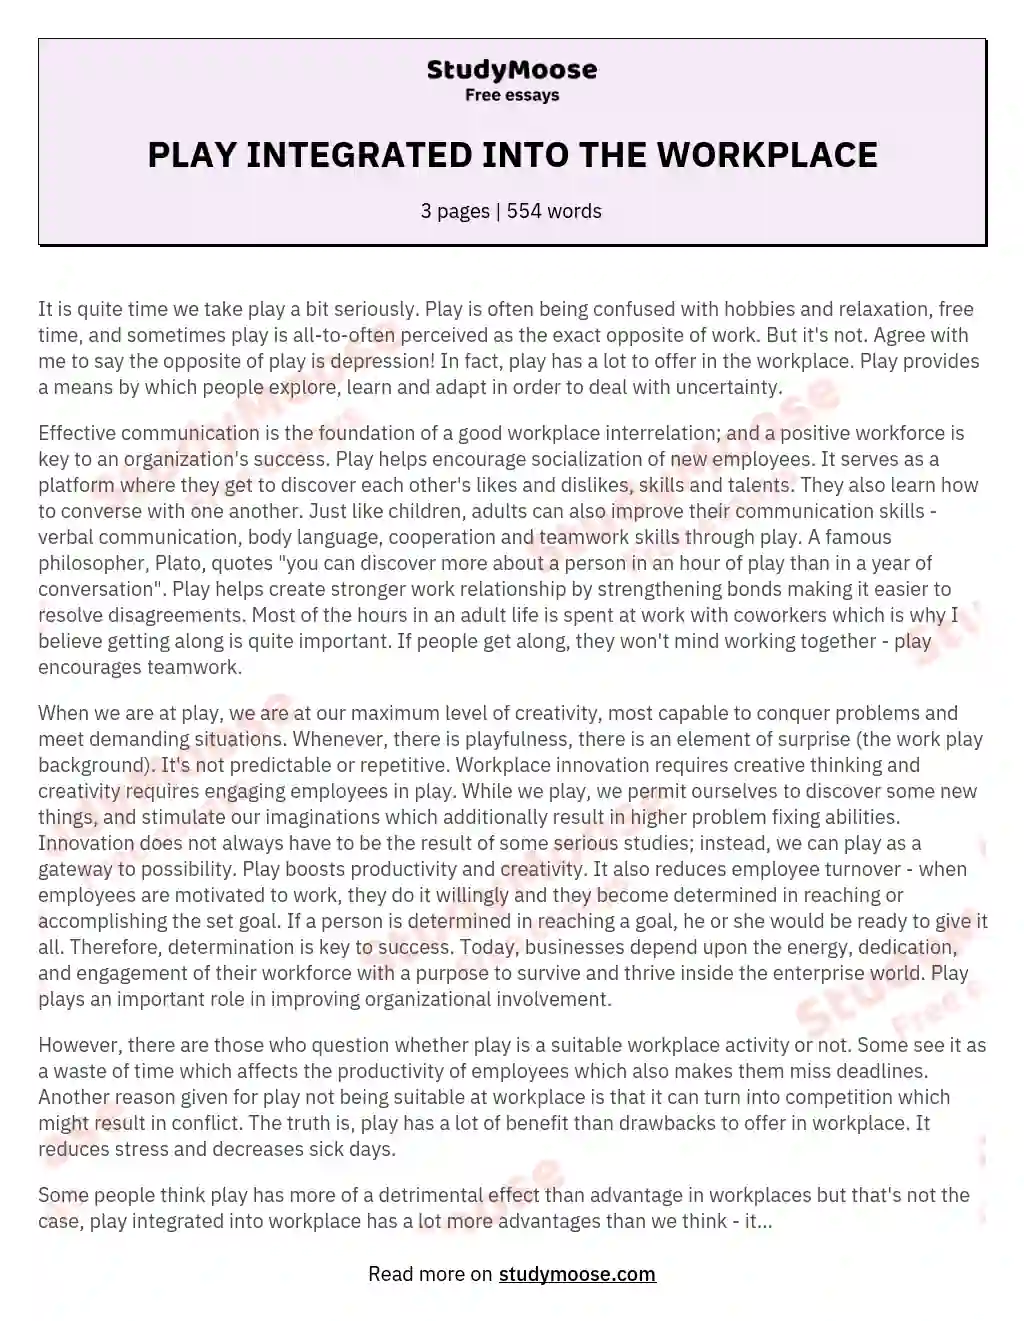 PLAY INTEGRATED INTO THE WORKPLACE essay